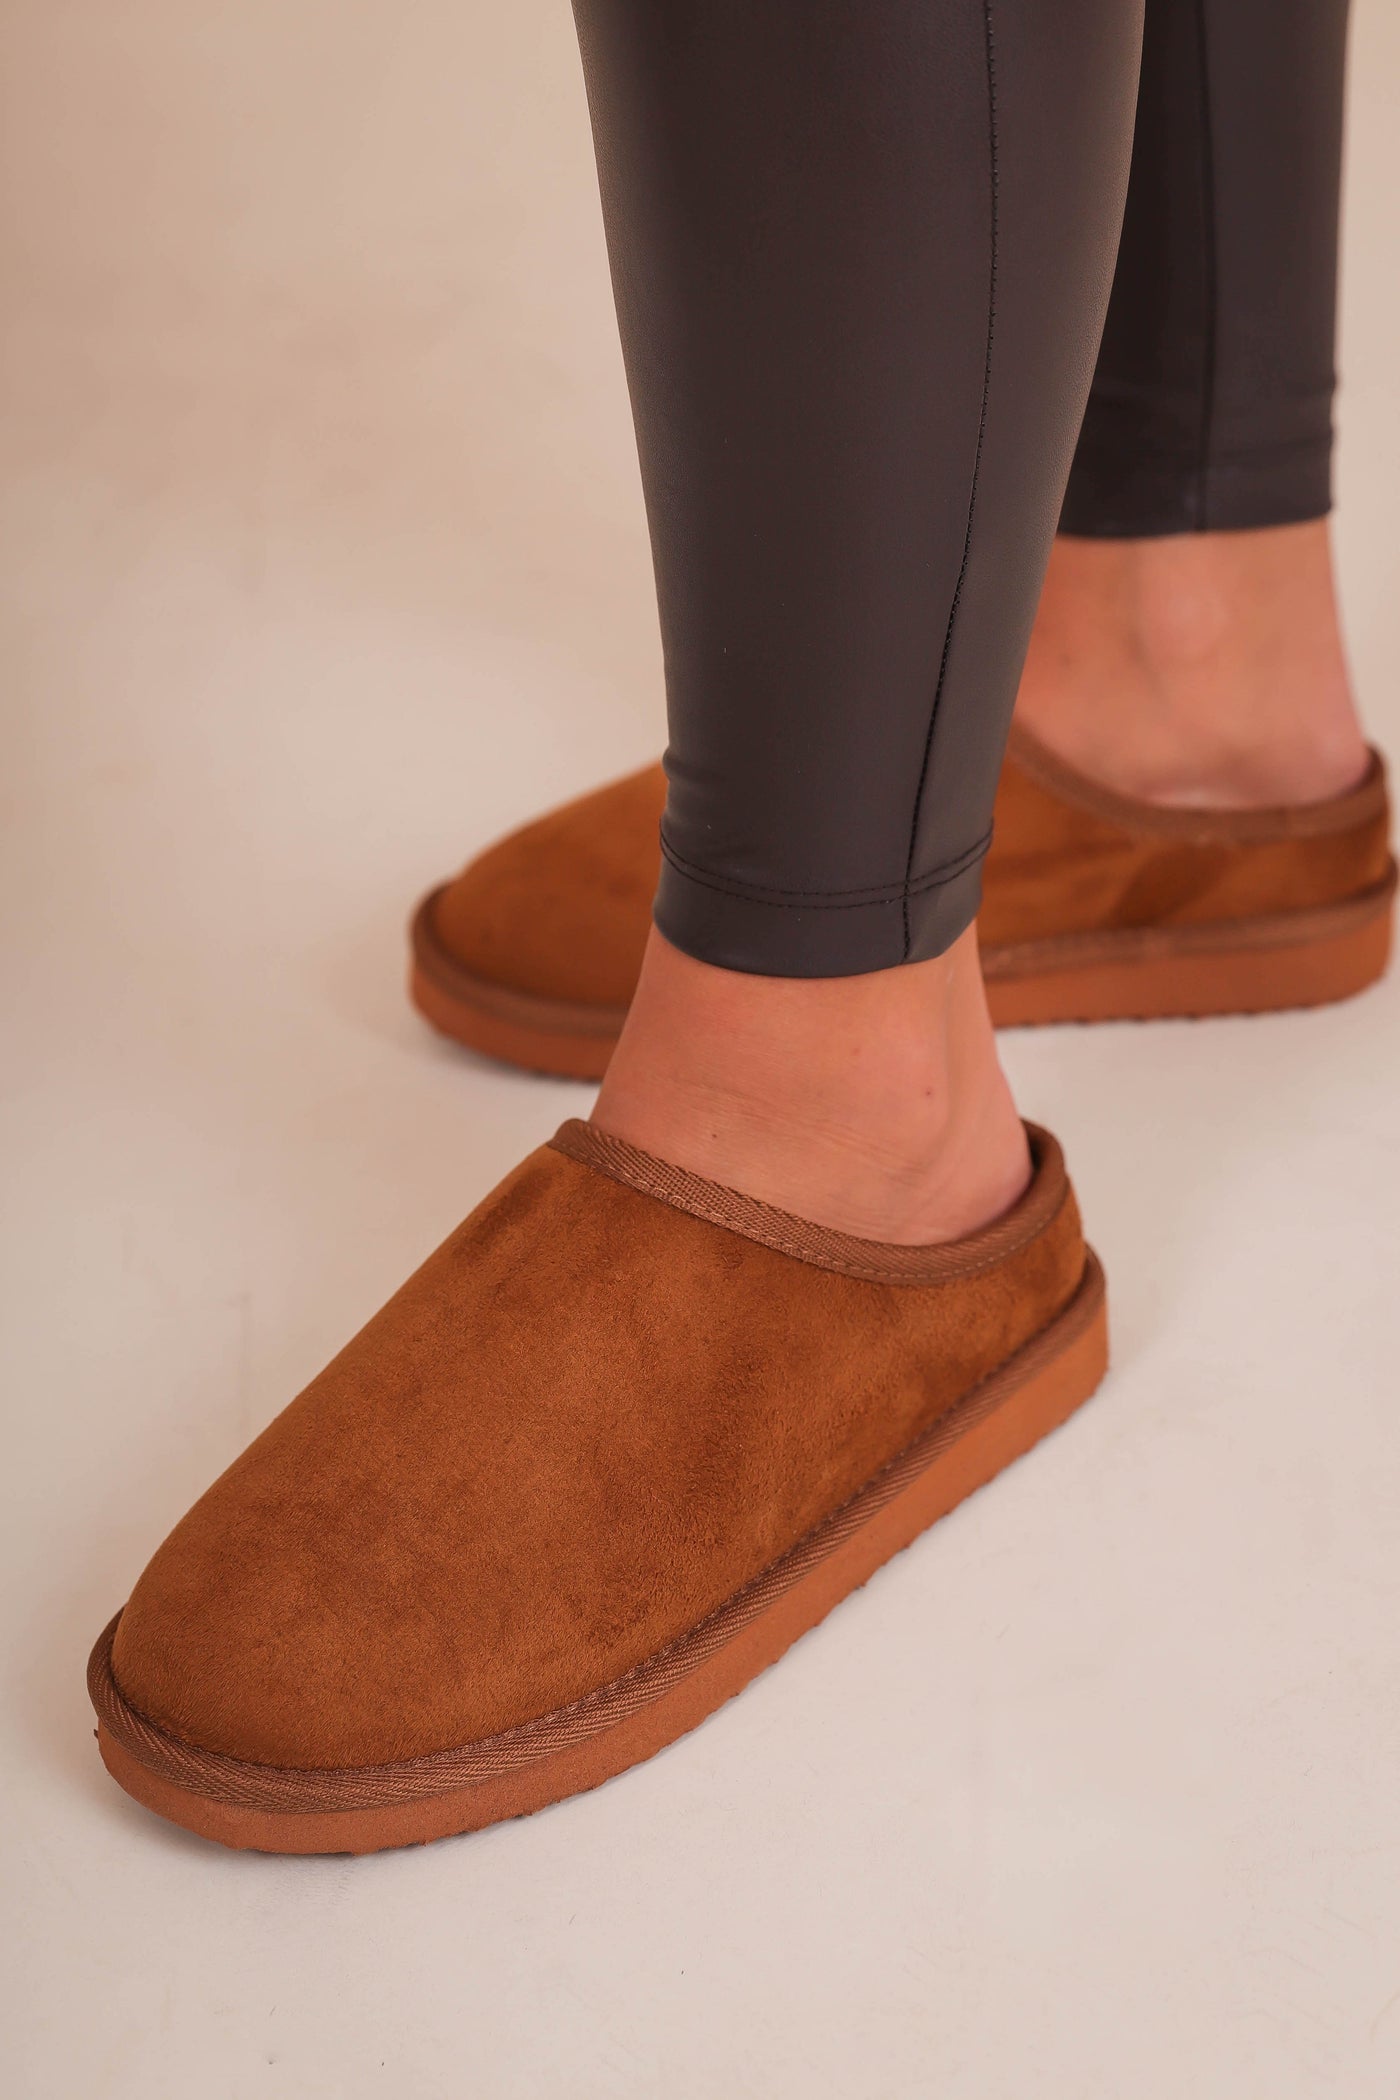 Women's Brown Fur Slippers- Dupe Fur Slippers- Outwoods Gallery-1